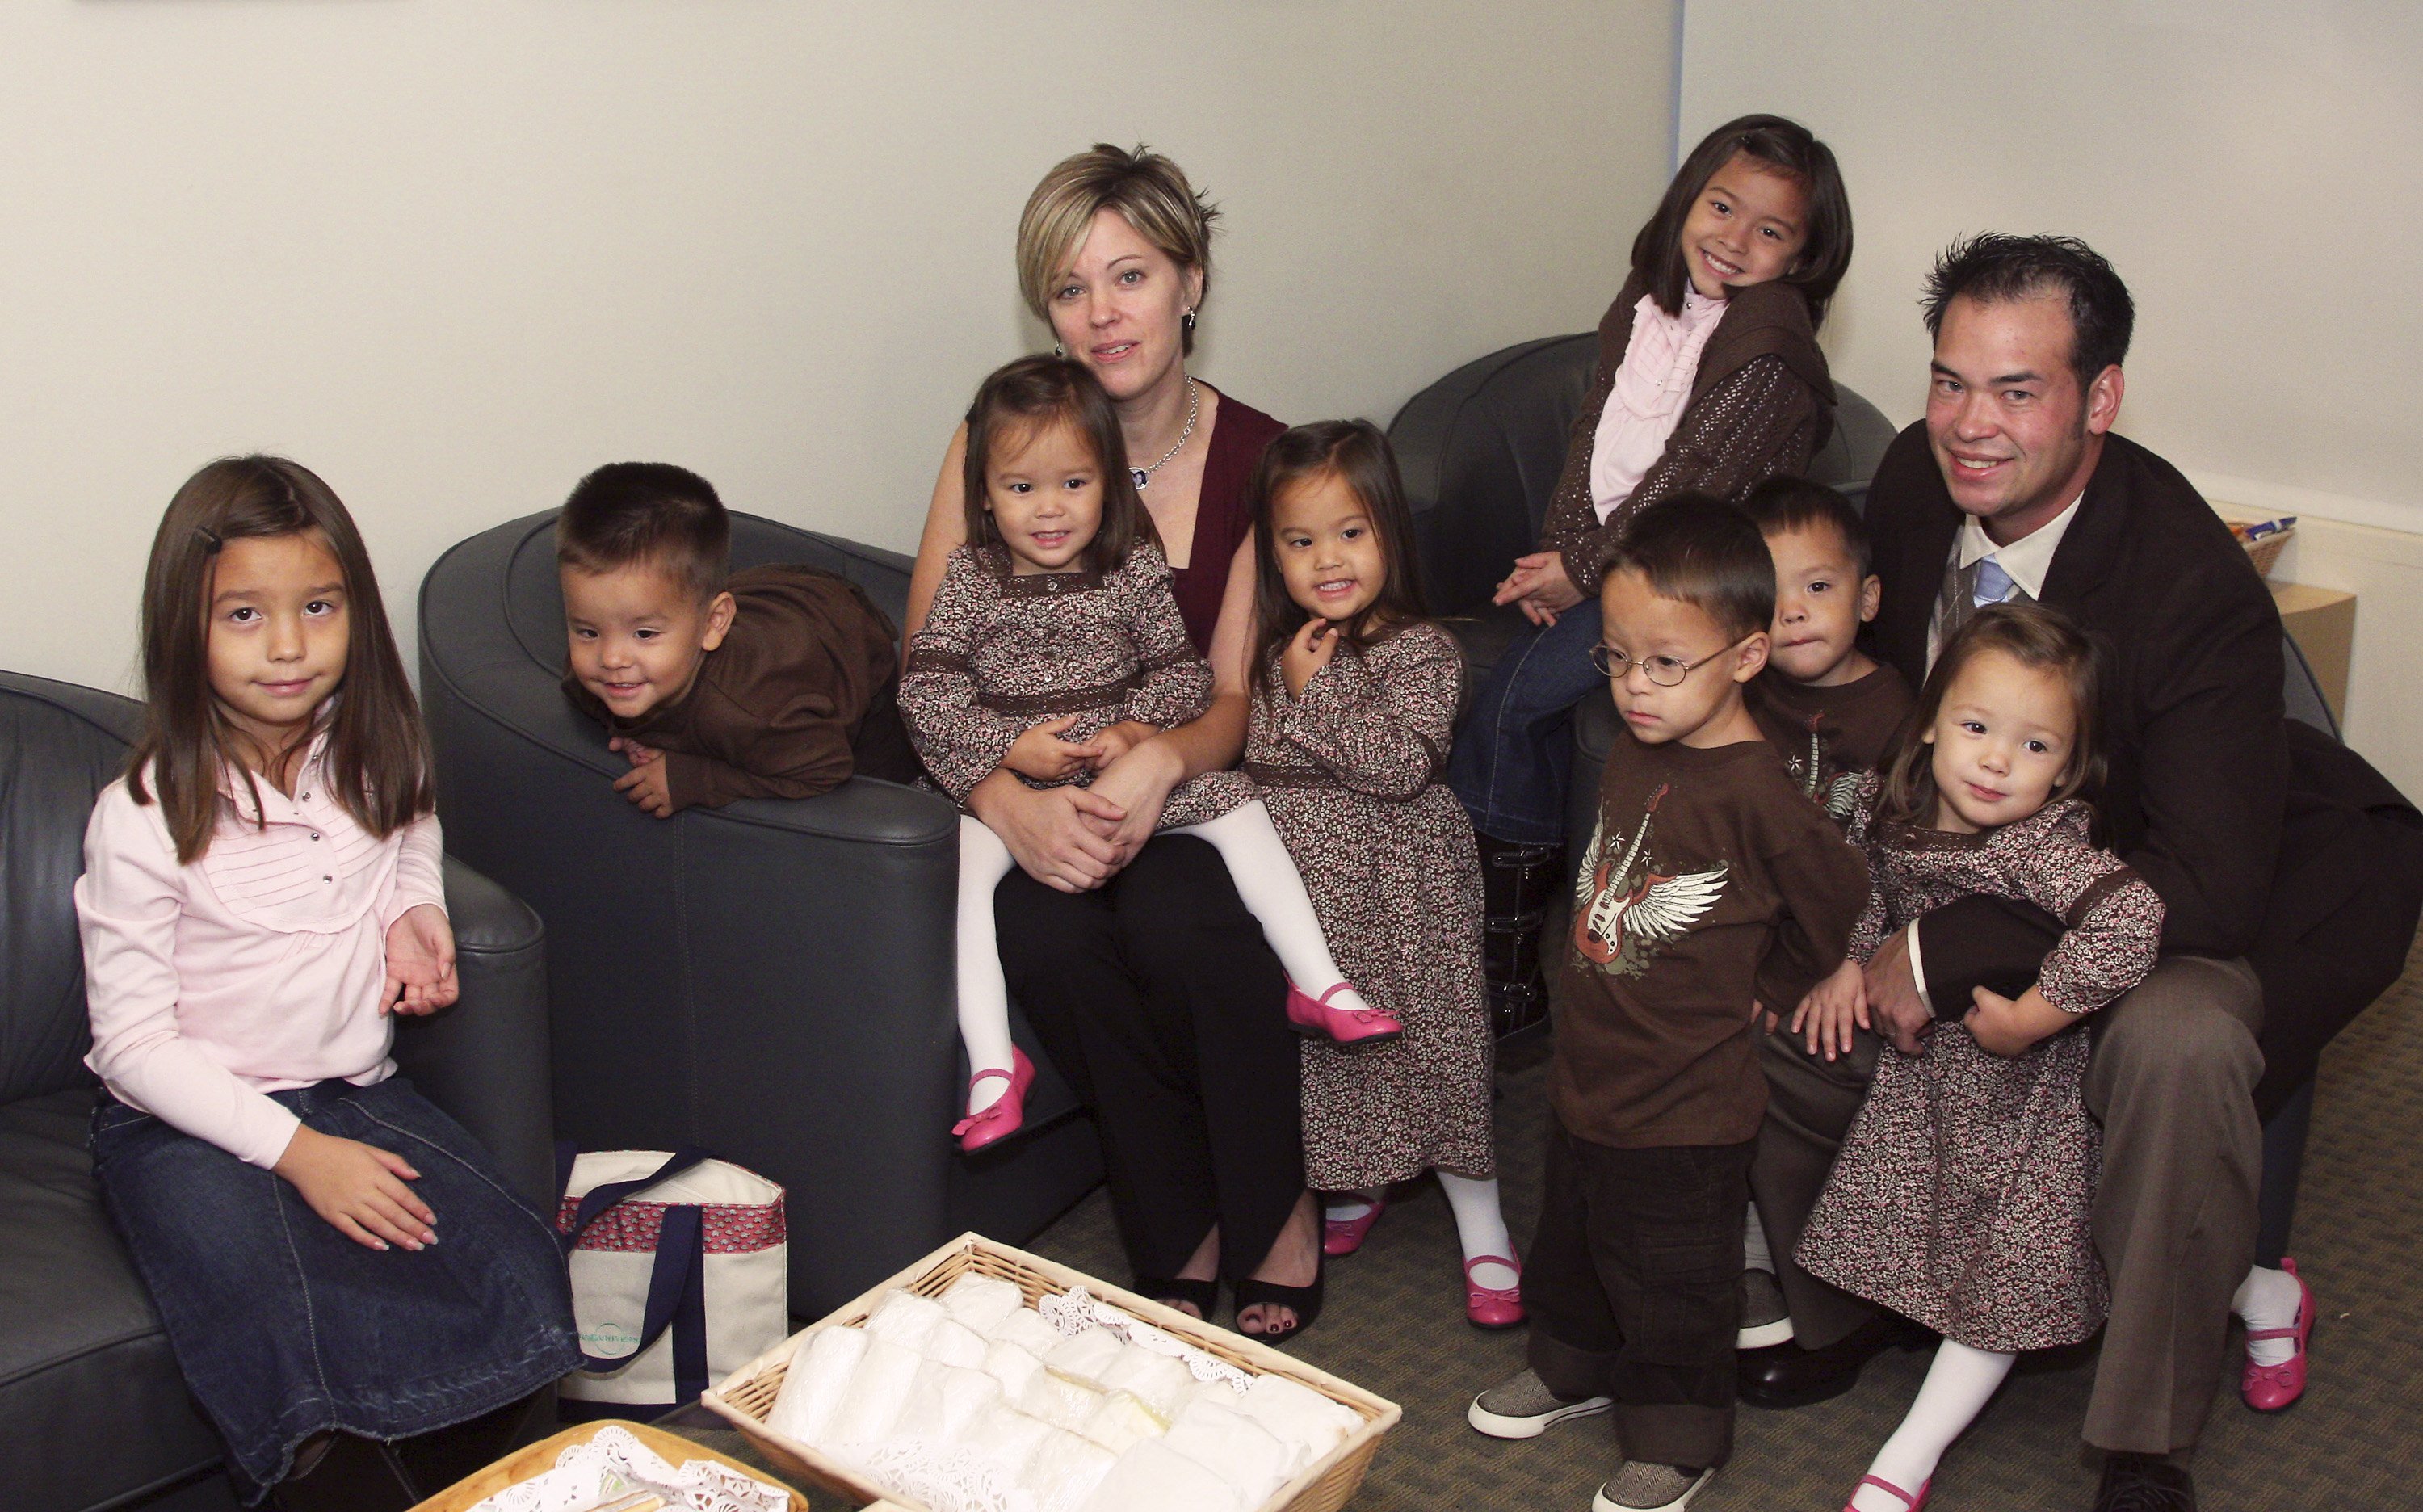 Kate and Jon Gosselin talk about their twin daughters and sextuplets on "Today" on October 2, 2007. | Source: Heidi Gutman/NBC NewsWire/Getty Images